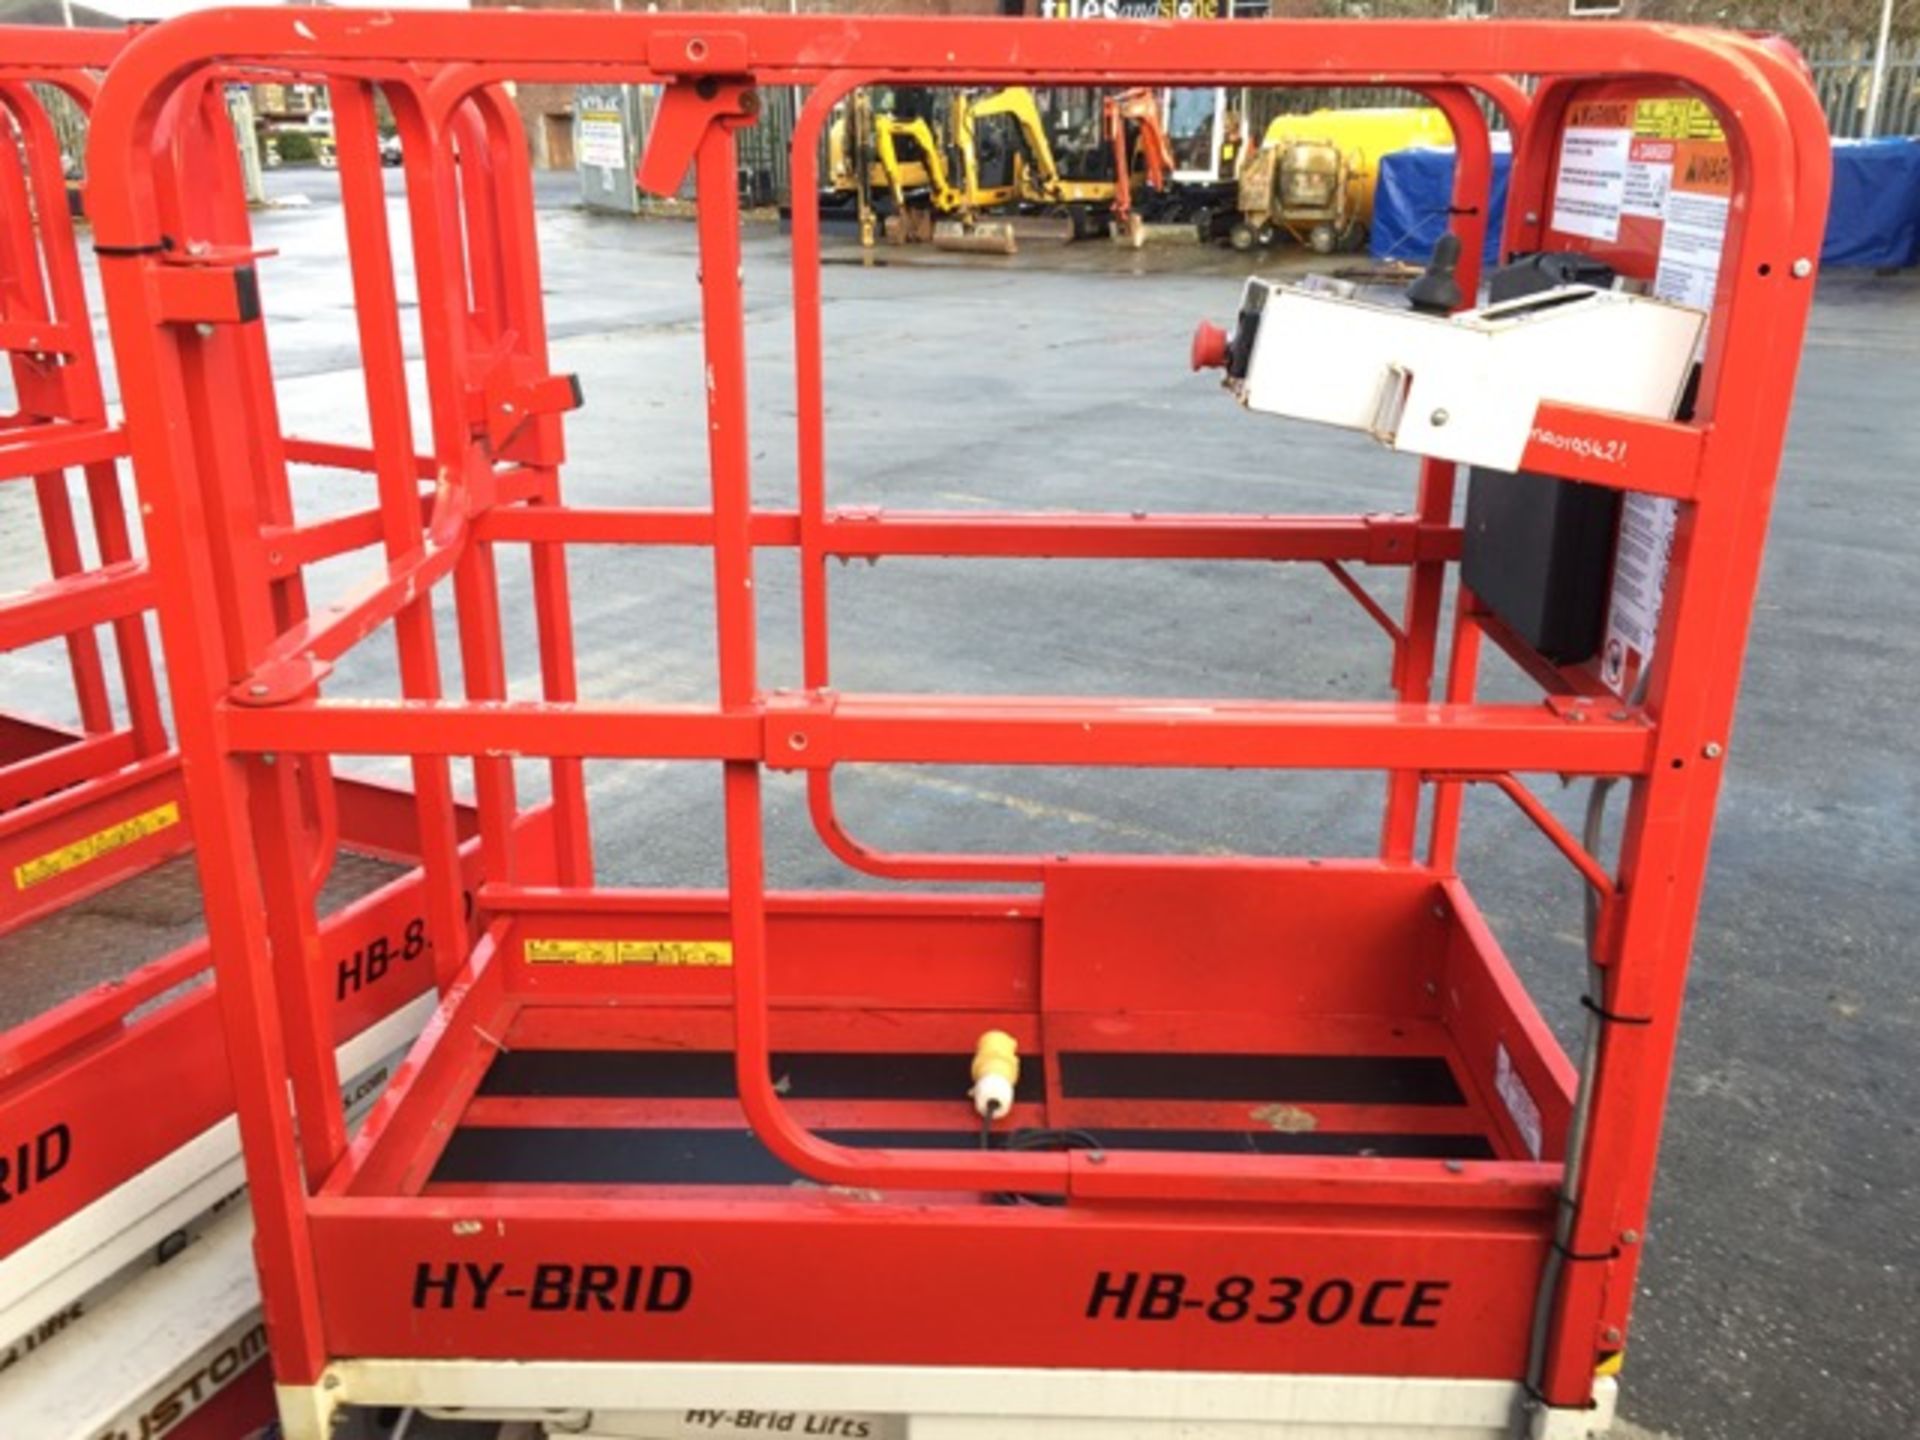 HY-BRID HB-830CE Self Propelled Man Lift - Image 3 of 3